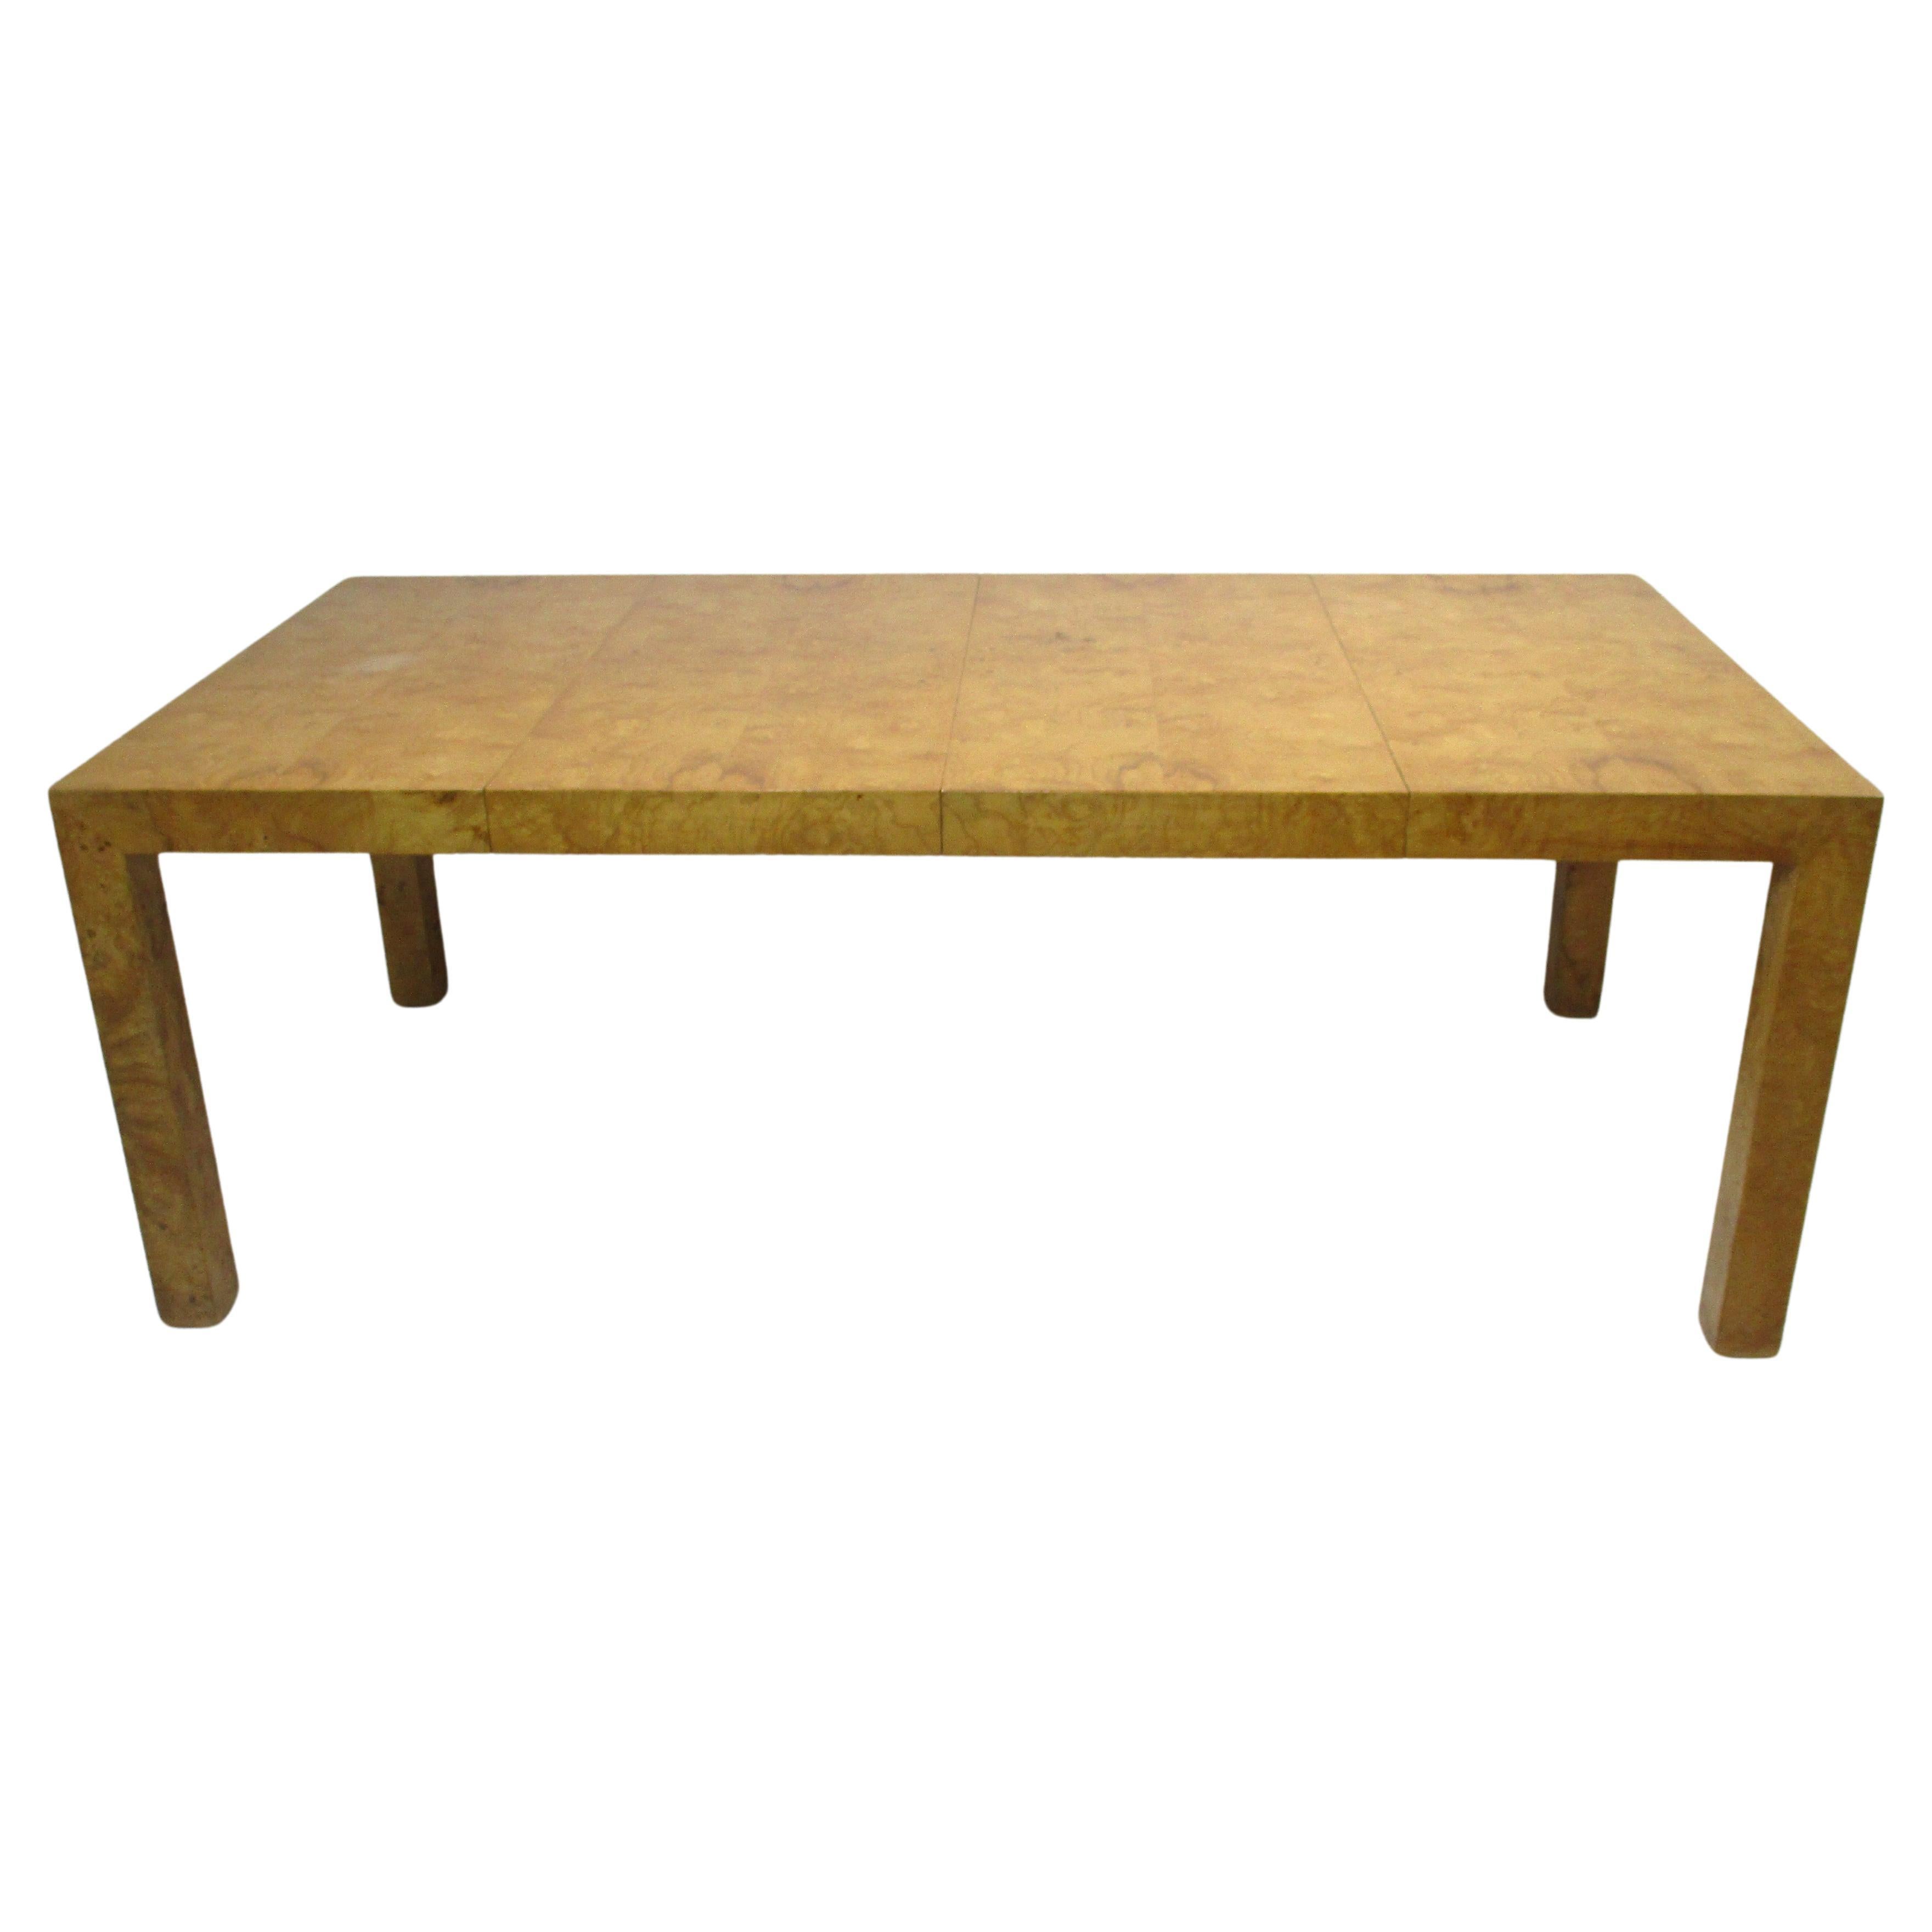 Milo Baughman Burl Wood Expandable Dining Table for Thayer Coggin 